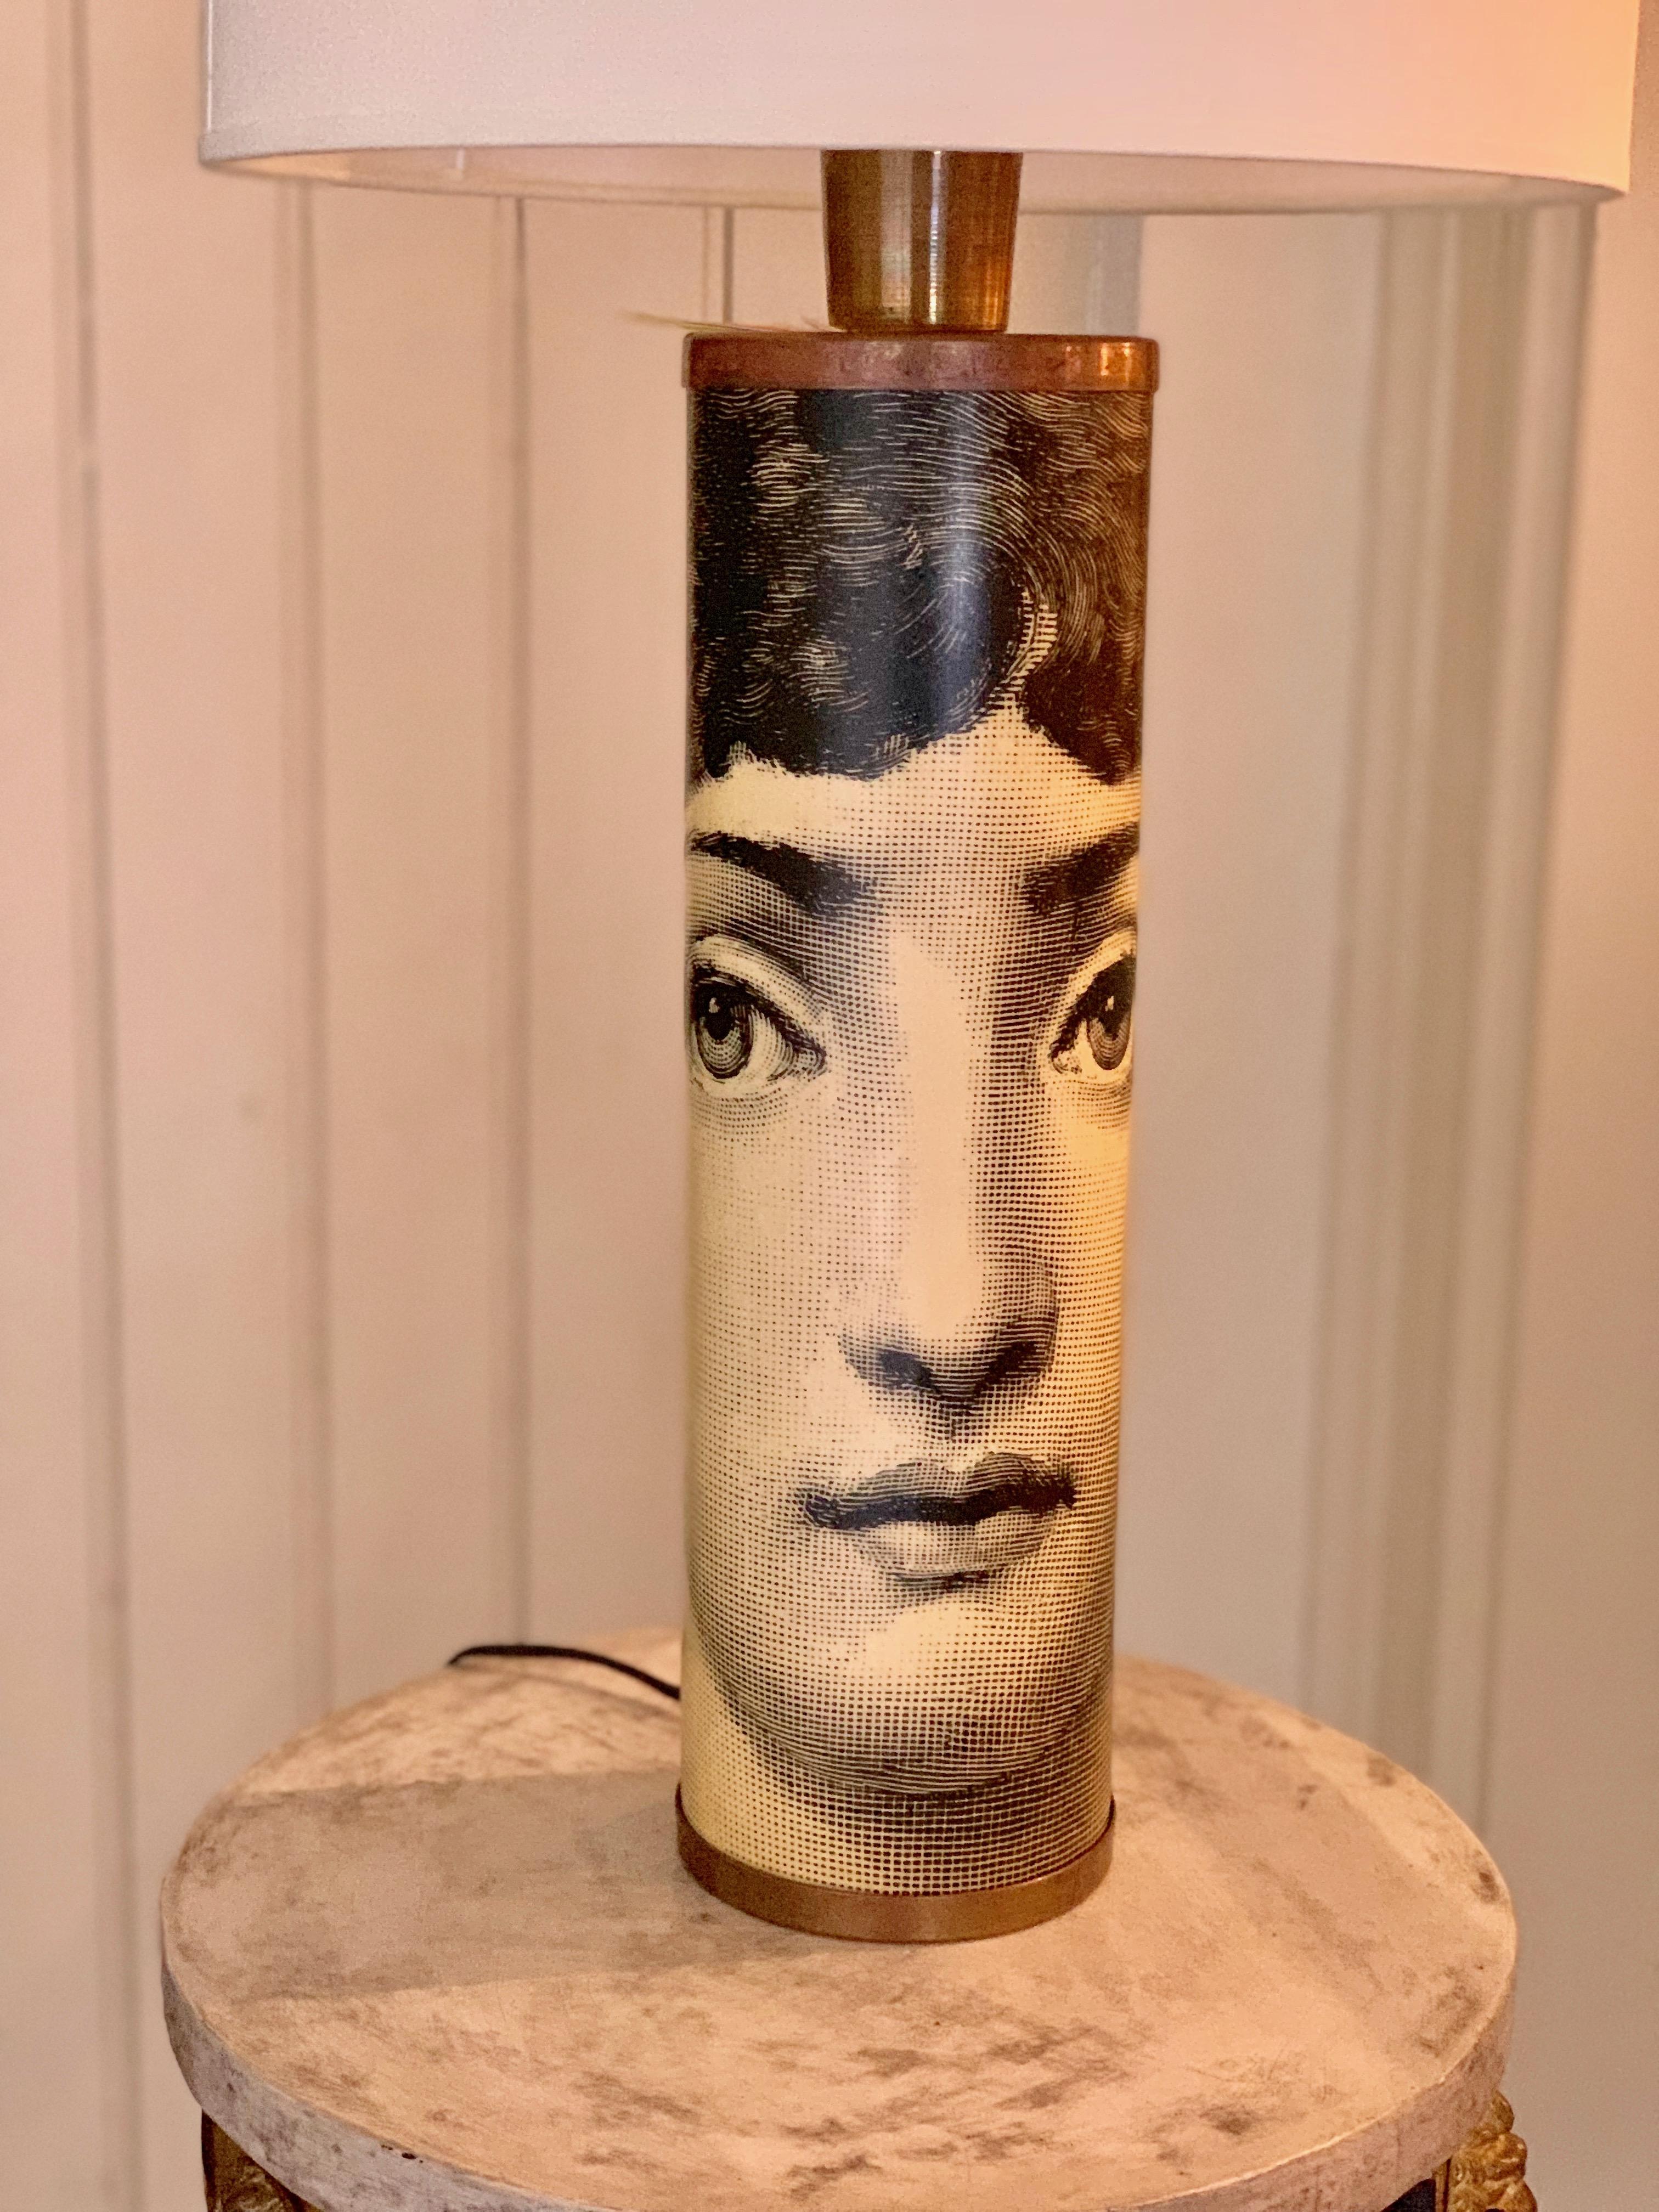 A table lamp designed by Fornasetti featuring the image of famed opera singer Lina Cavalieri screen-printed around the base. Once called the 